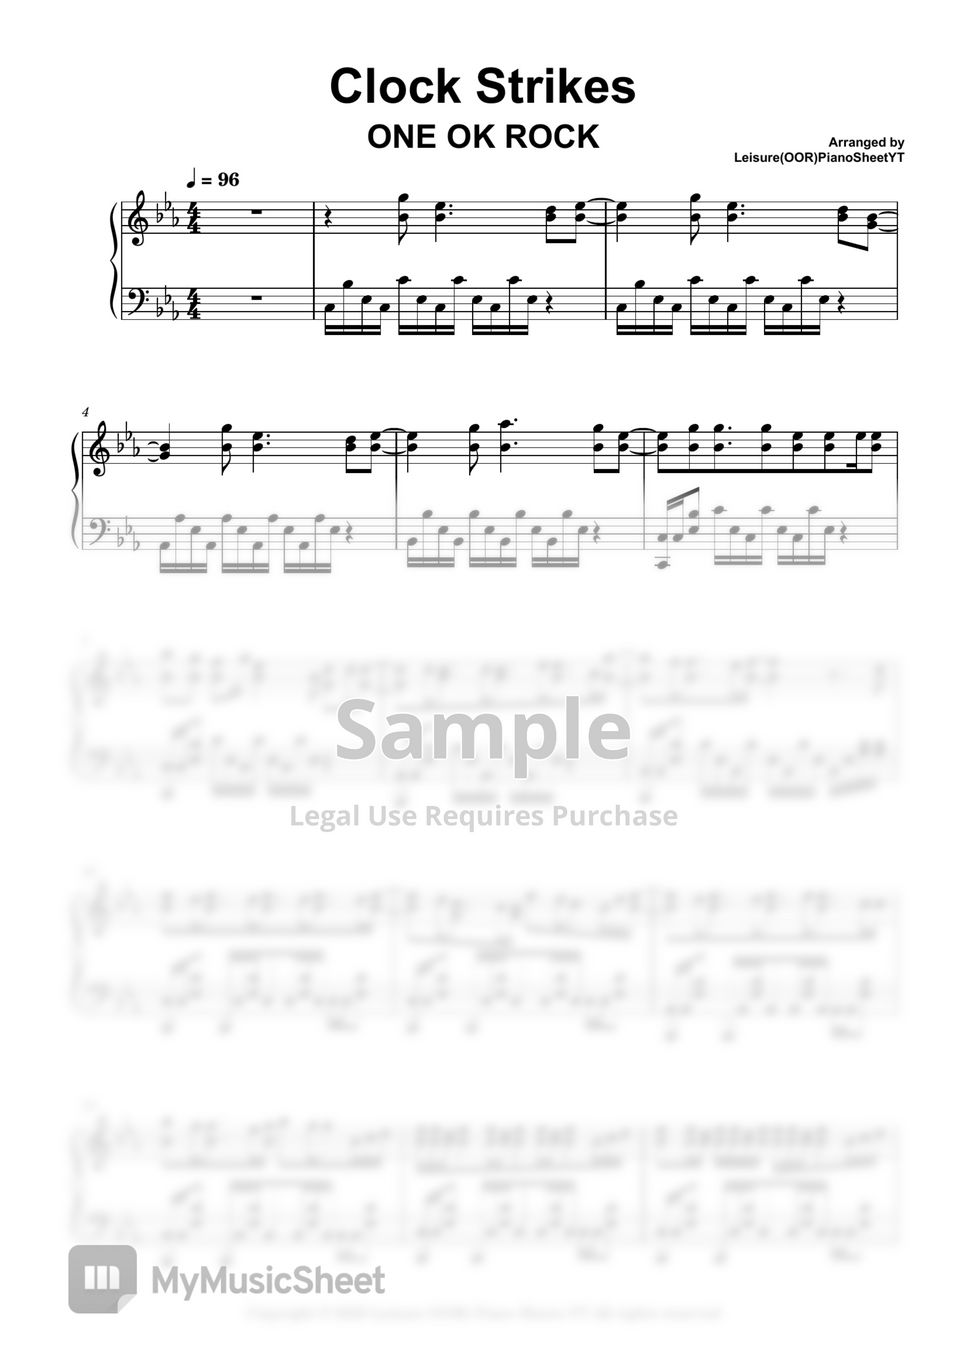 ONE	OK ROCK - Clock Strikes by Leisure (OOR) Piano Sheets YT